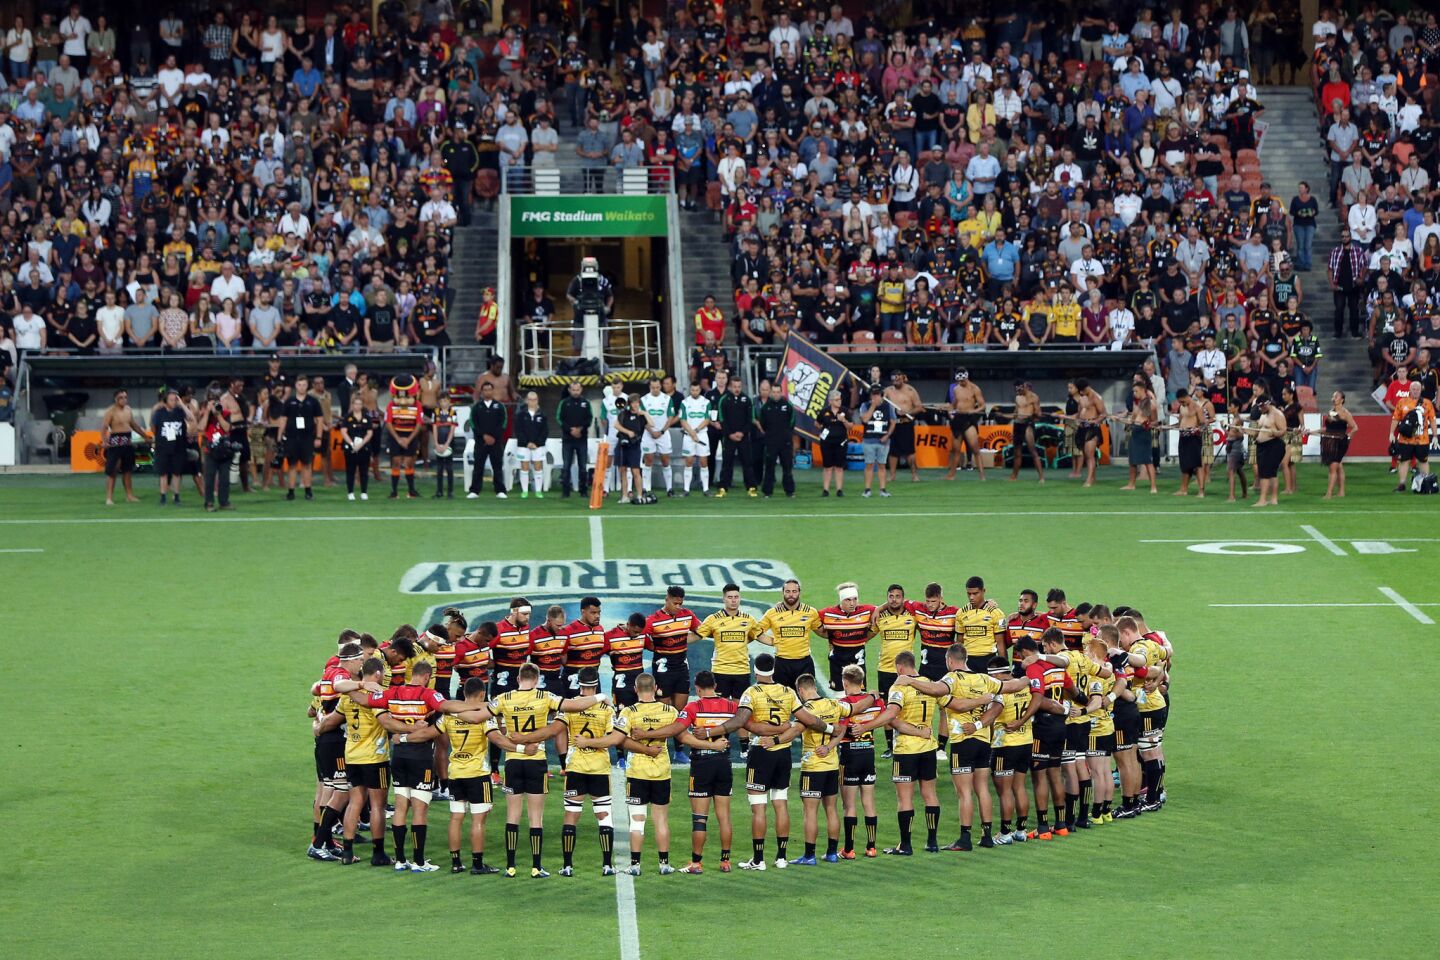 The Chiefs and Hurricanes observe a moment of silence Friday before a Super Rugby match at FMG Stadium in Hamilton, New Zealand.